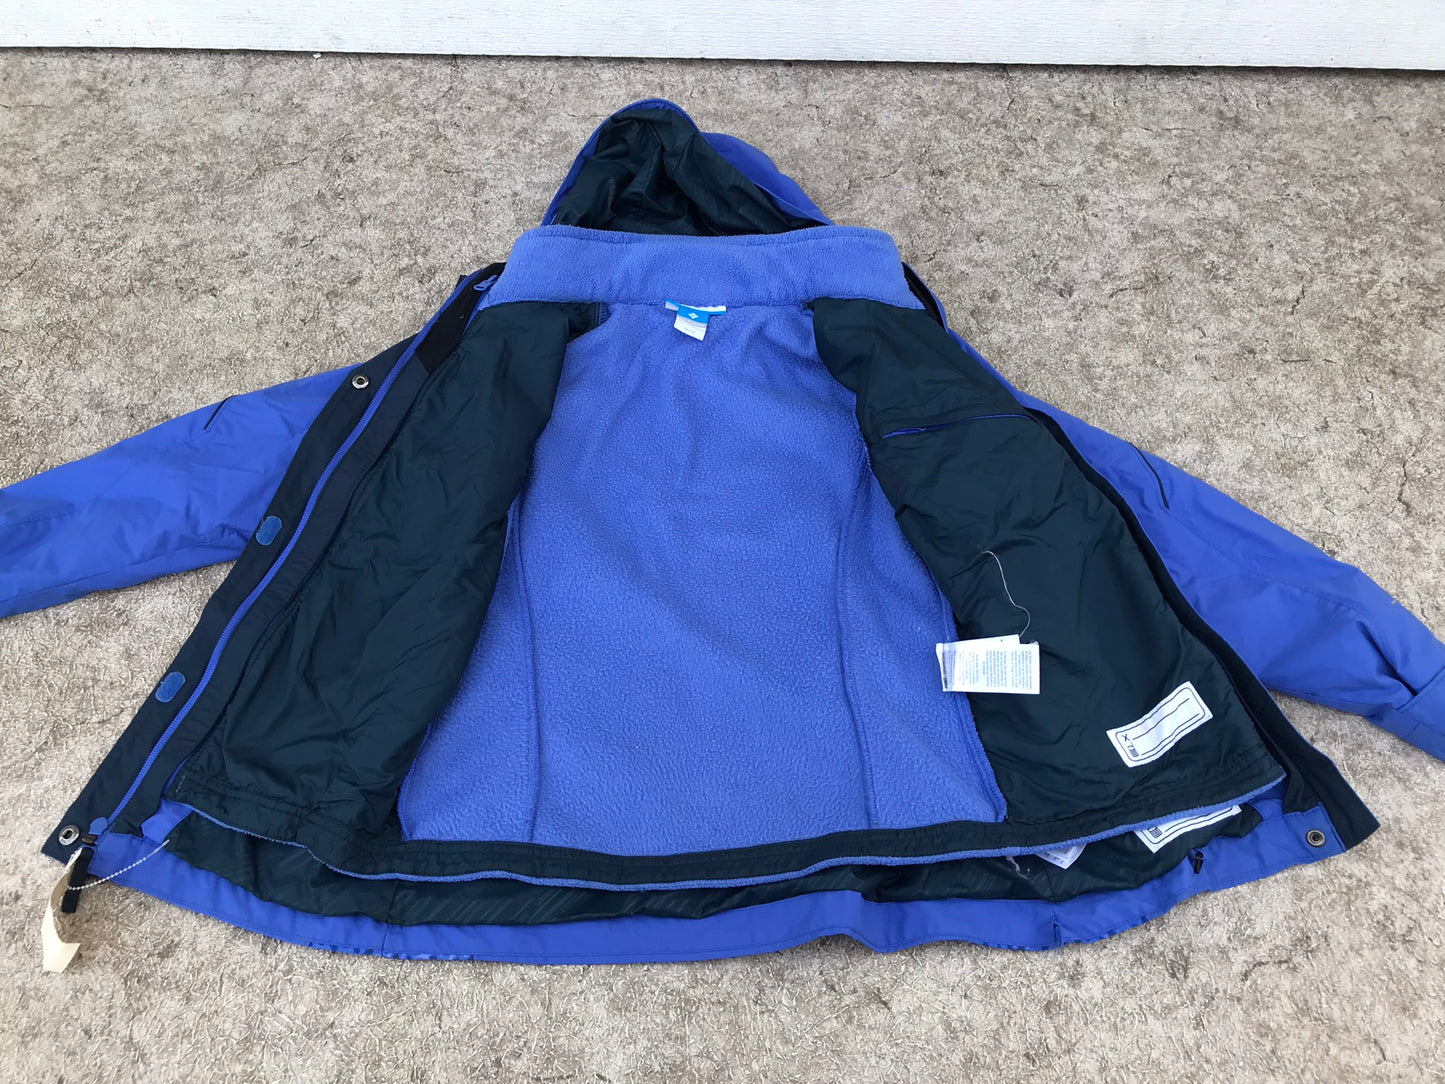 Winter Coat Child Size 10-12 Columbia Violet Fleece Lined With Snow Belt